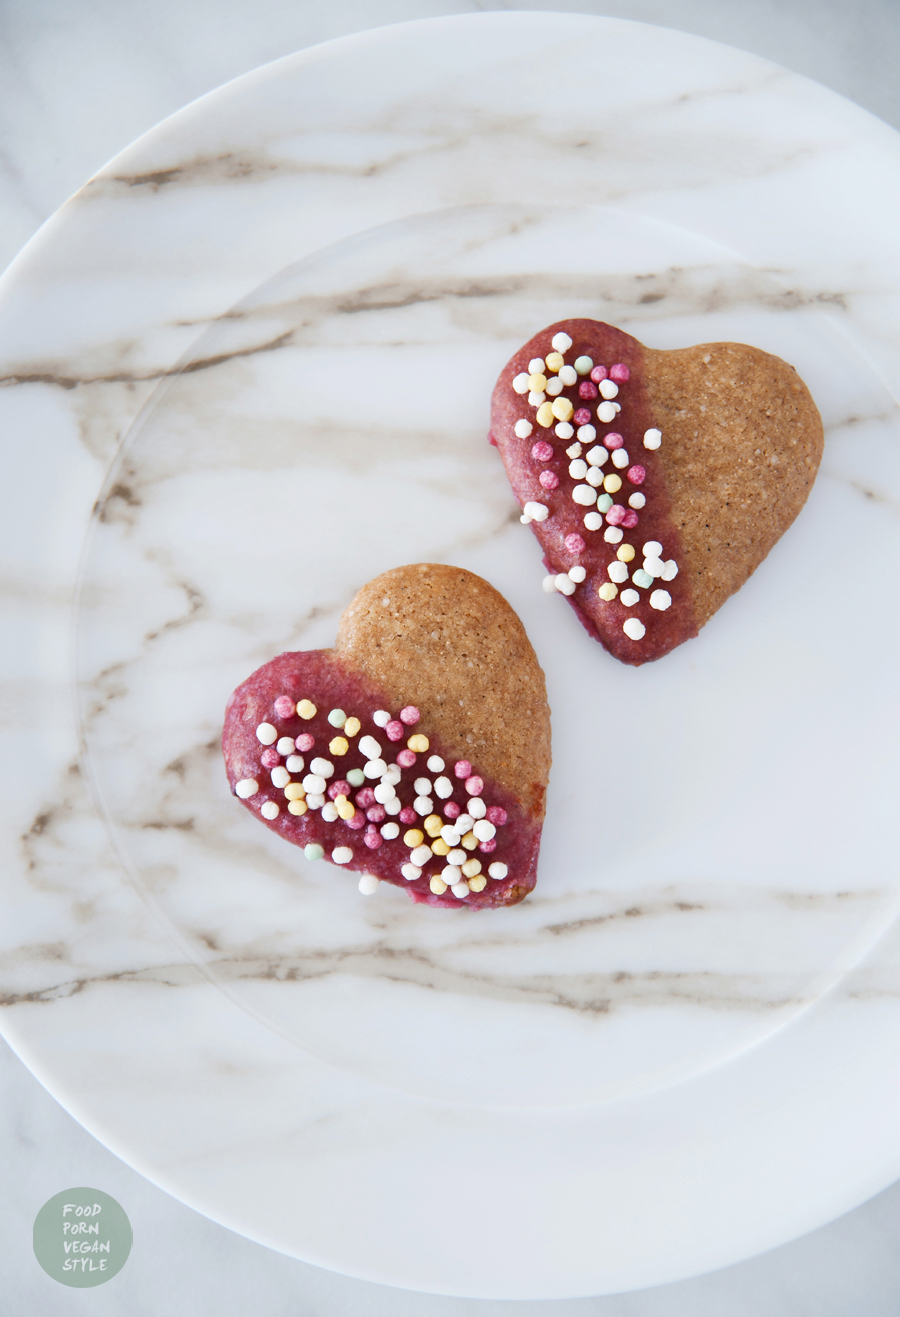 Vegan almond-chestnut cookies 'hearts' with pink icing and colorful sprinkles